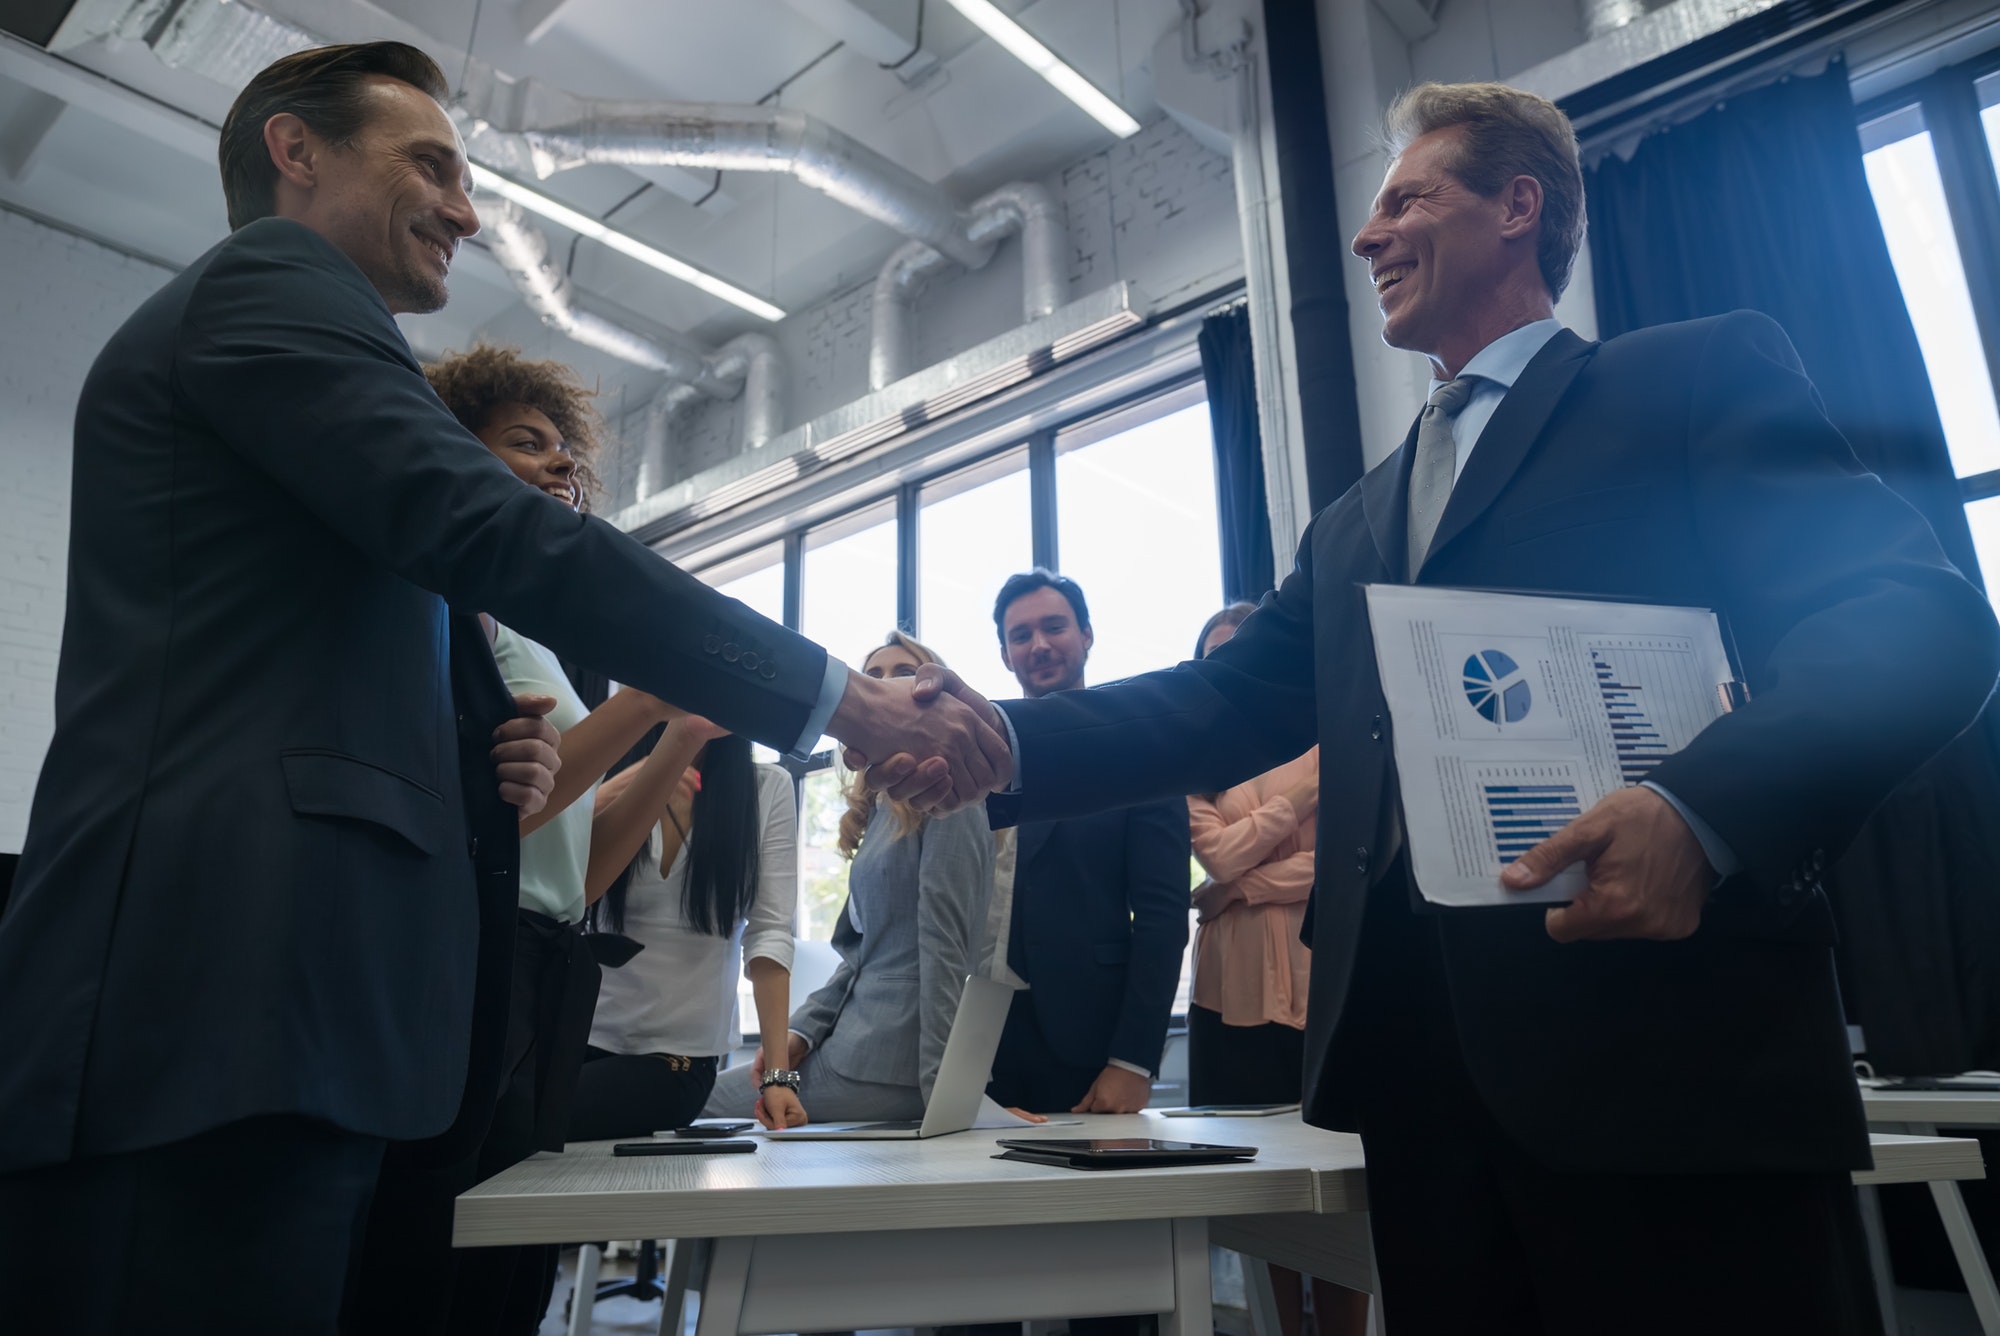 Business Handshake With Businesspeople On Background, Colleagues Shaking Hands During Meeting After